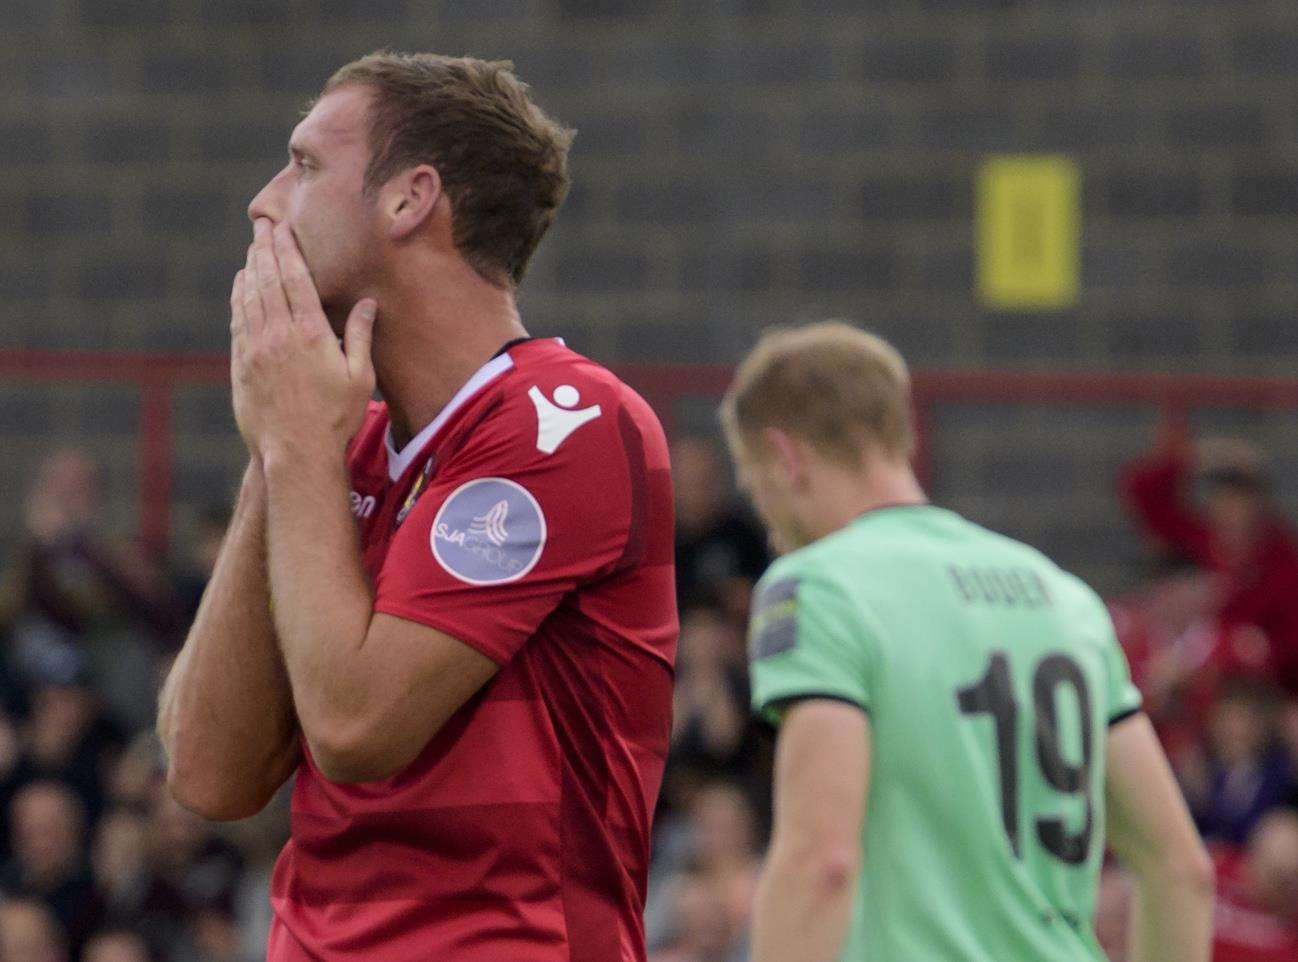 Andy Drury reacts to Darren McQueen's missed overhead kick at goal Picture: Andy Payton